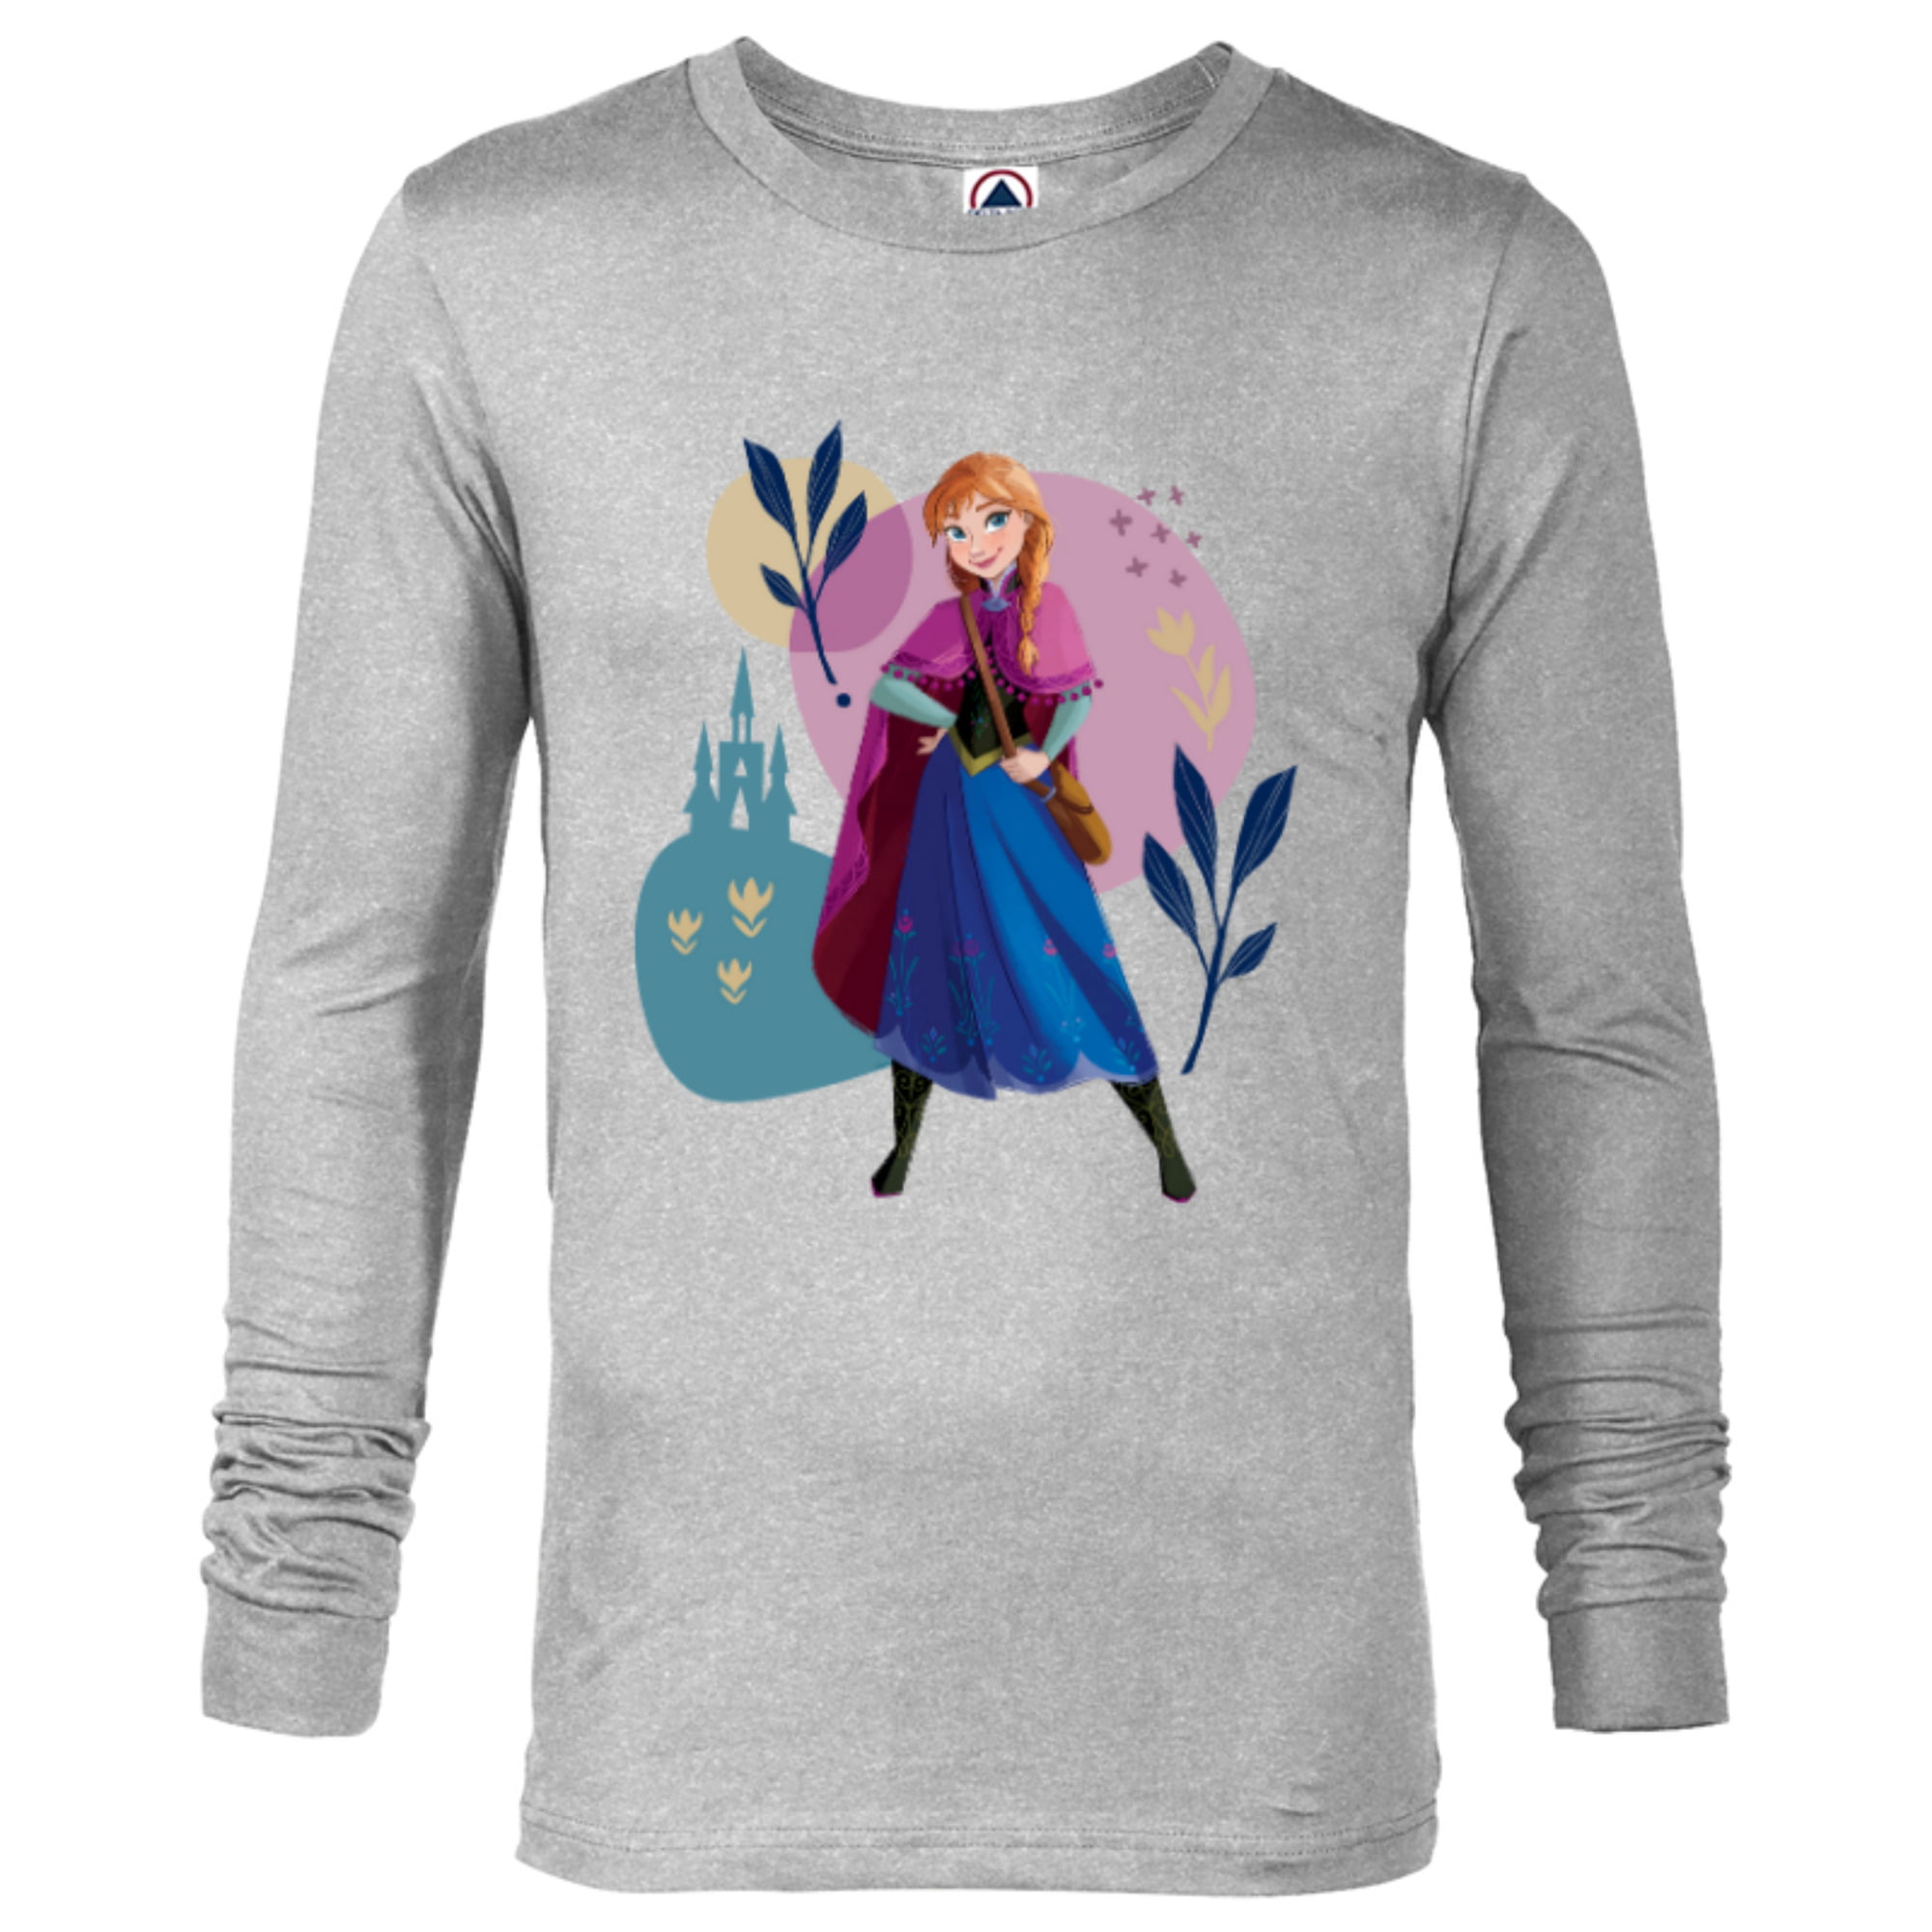 Disney Frozen Princess Customized-Athletic Anna T-Shirt for Heather - Sleeve Arendelle - Men of Long